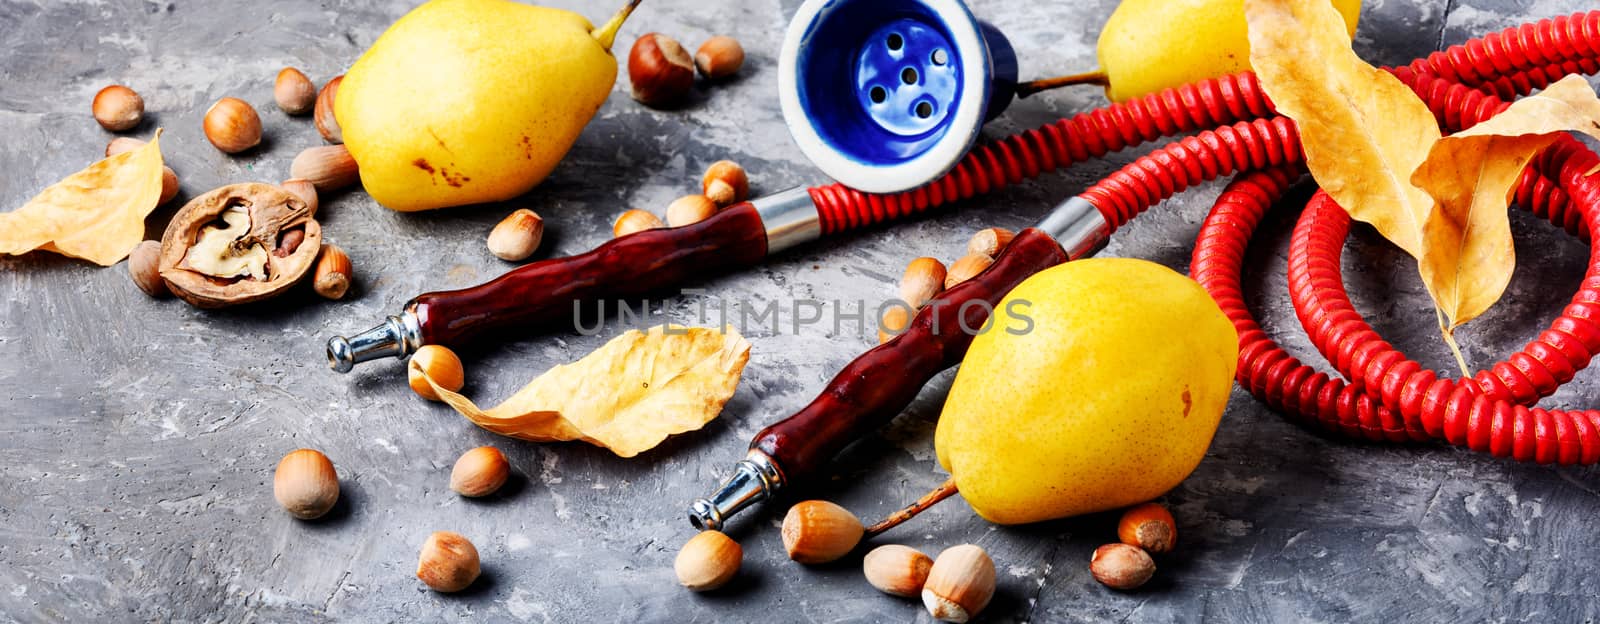 Oriental smoking hookah with two mouthpieces with pear flavor.sShisha advertising.Long banner